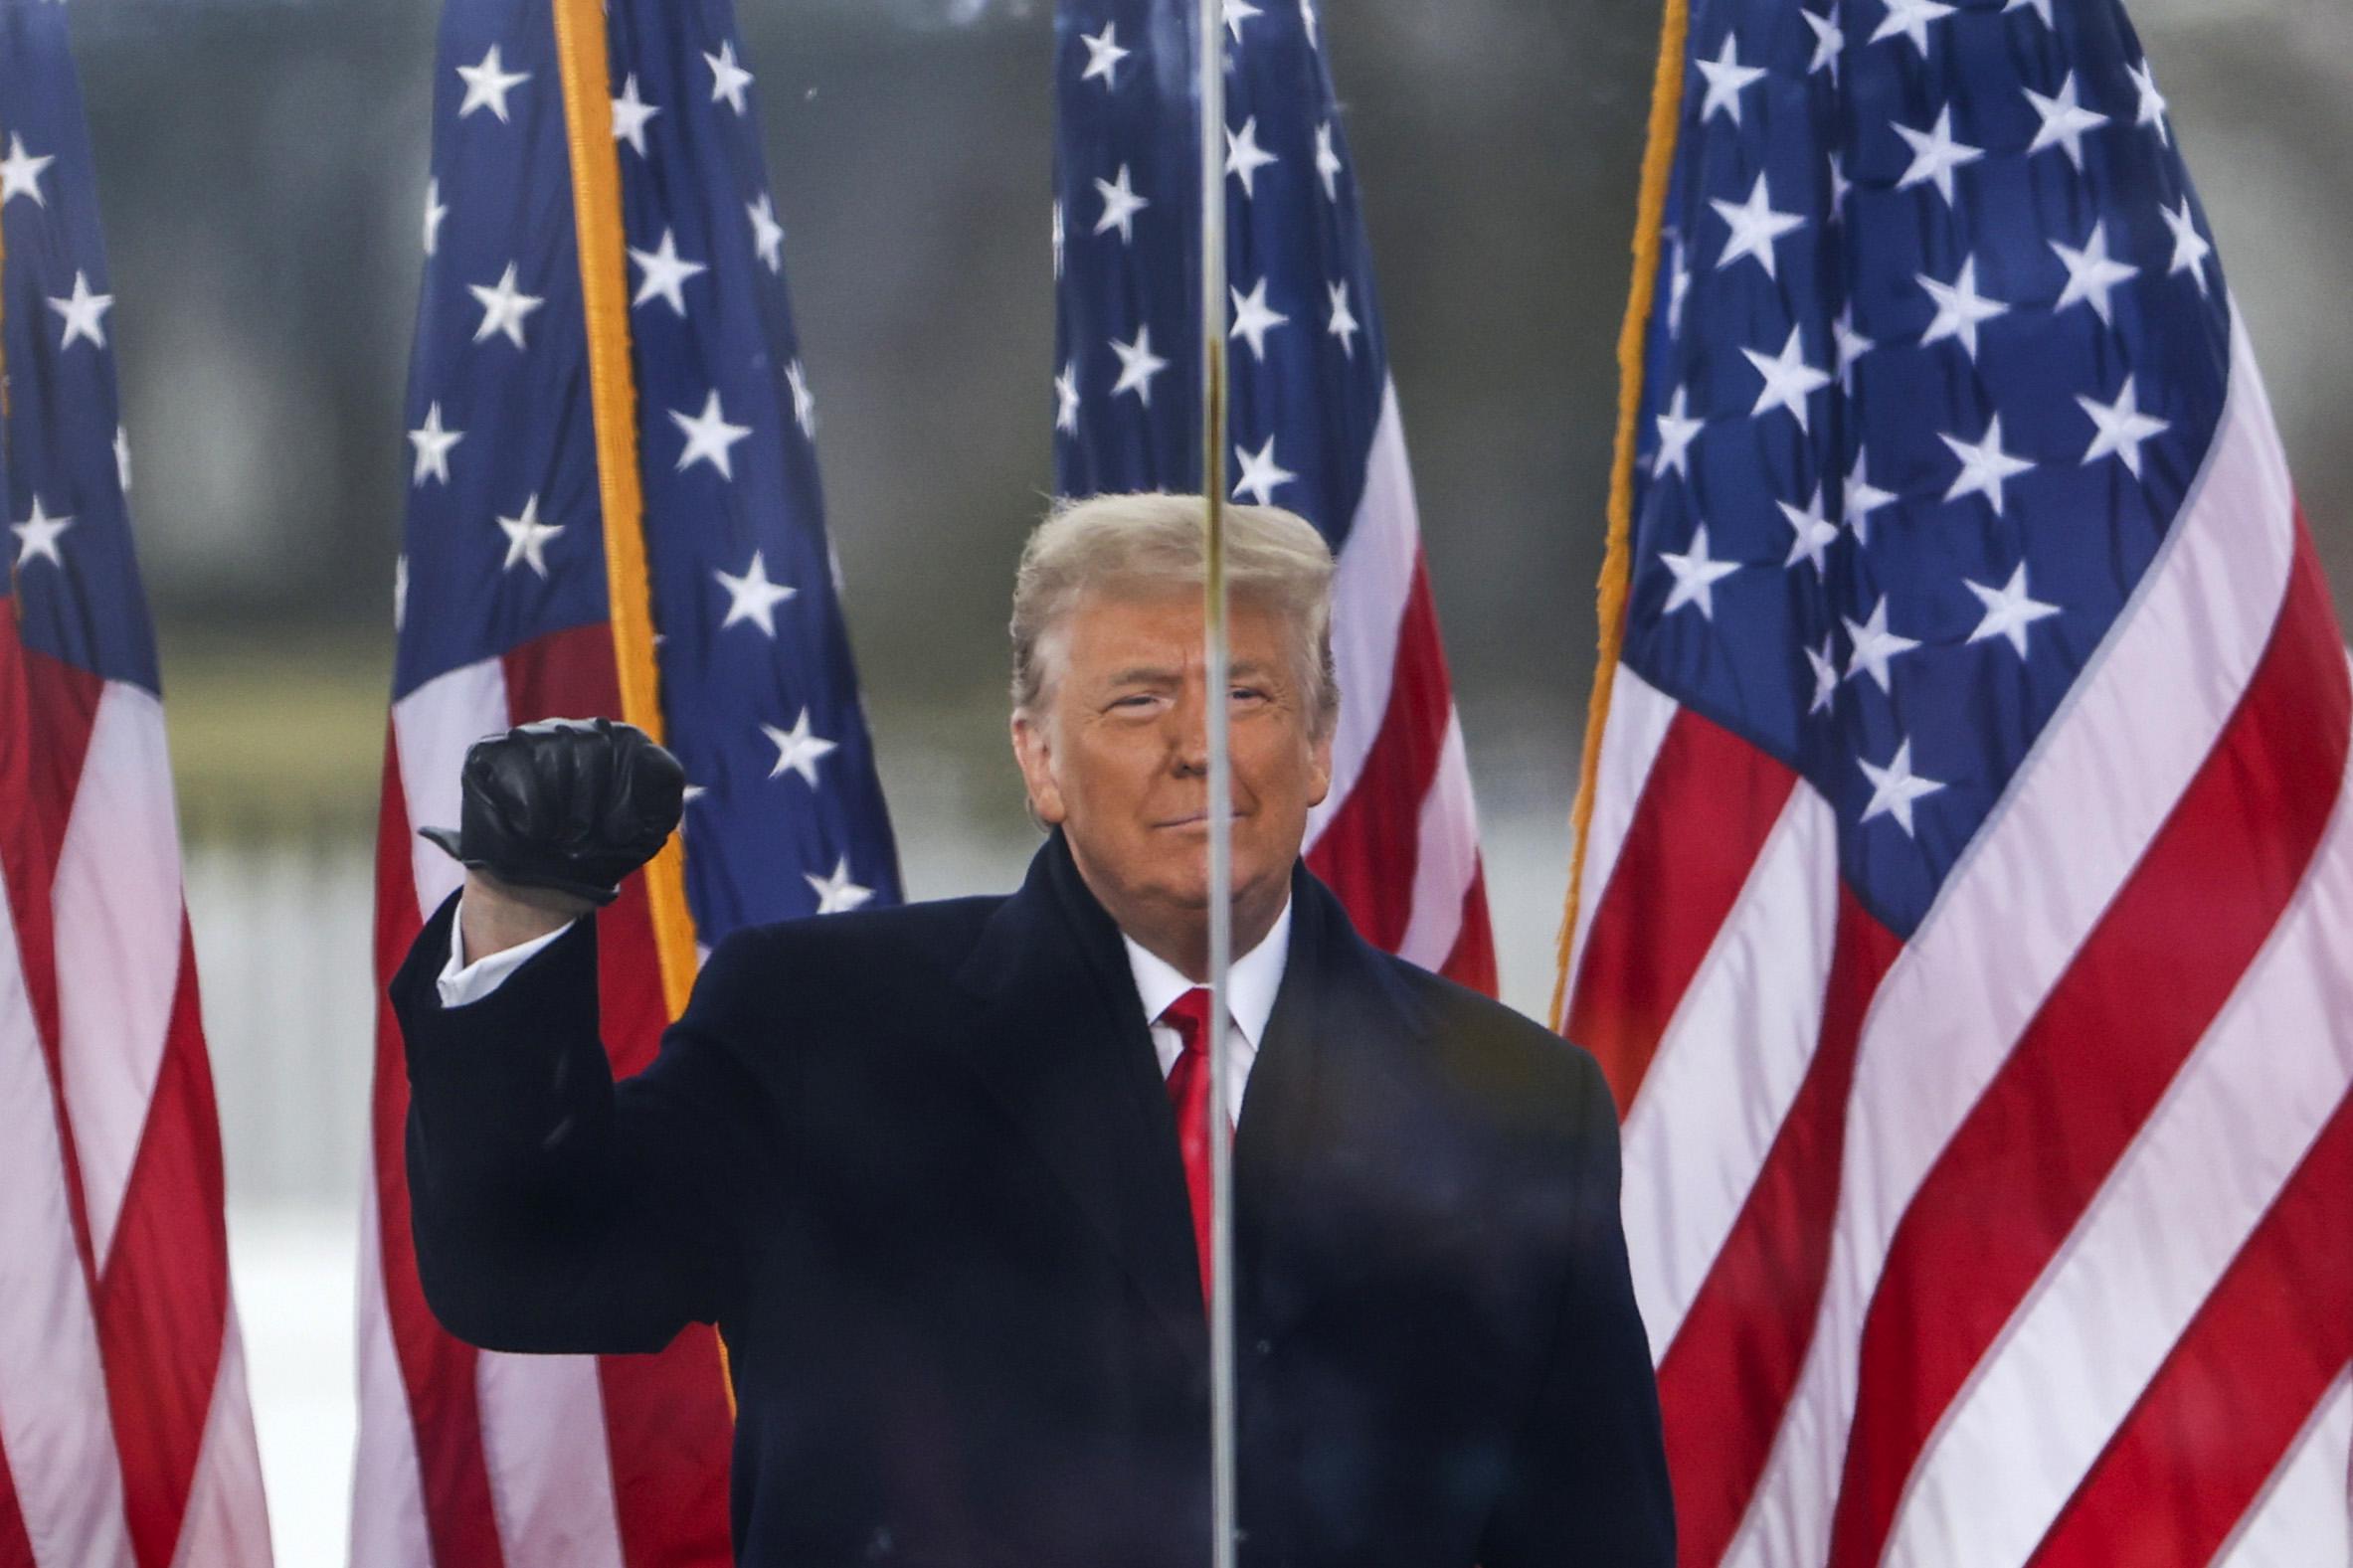 Trump smiles and makes a fist, standing onstage in front of American flags